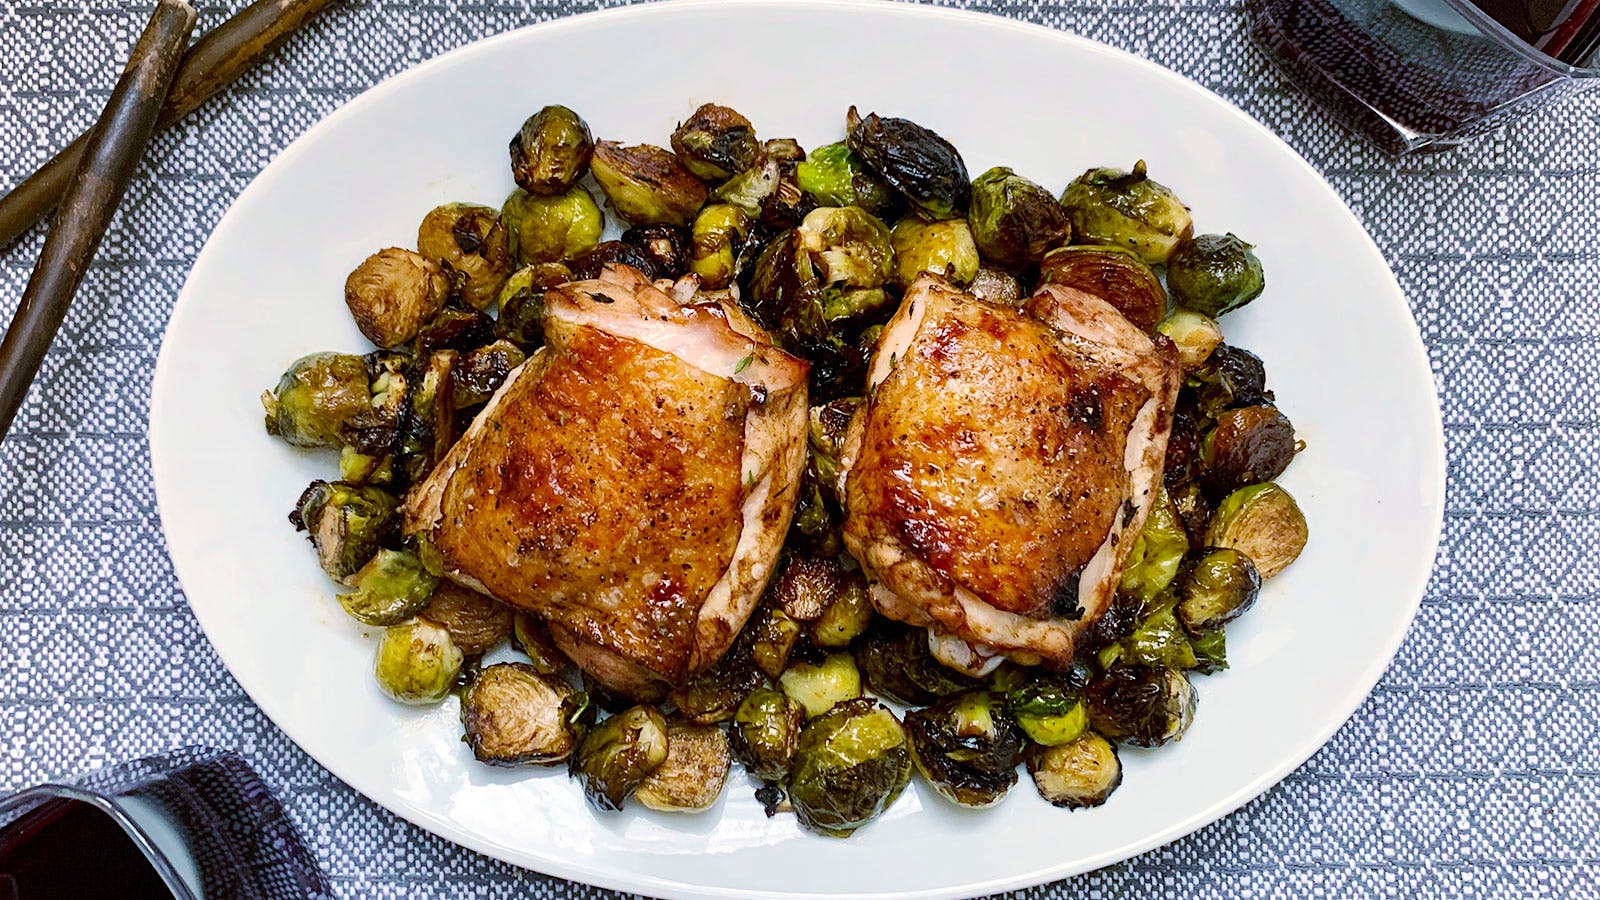 8 & $20: Sheet-Pan Chicken with Balsamic and Brussels Sprouts